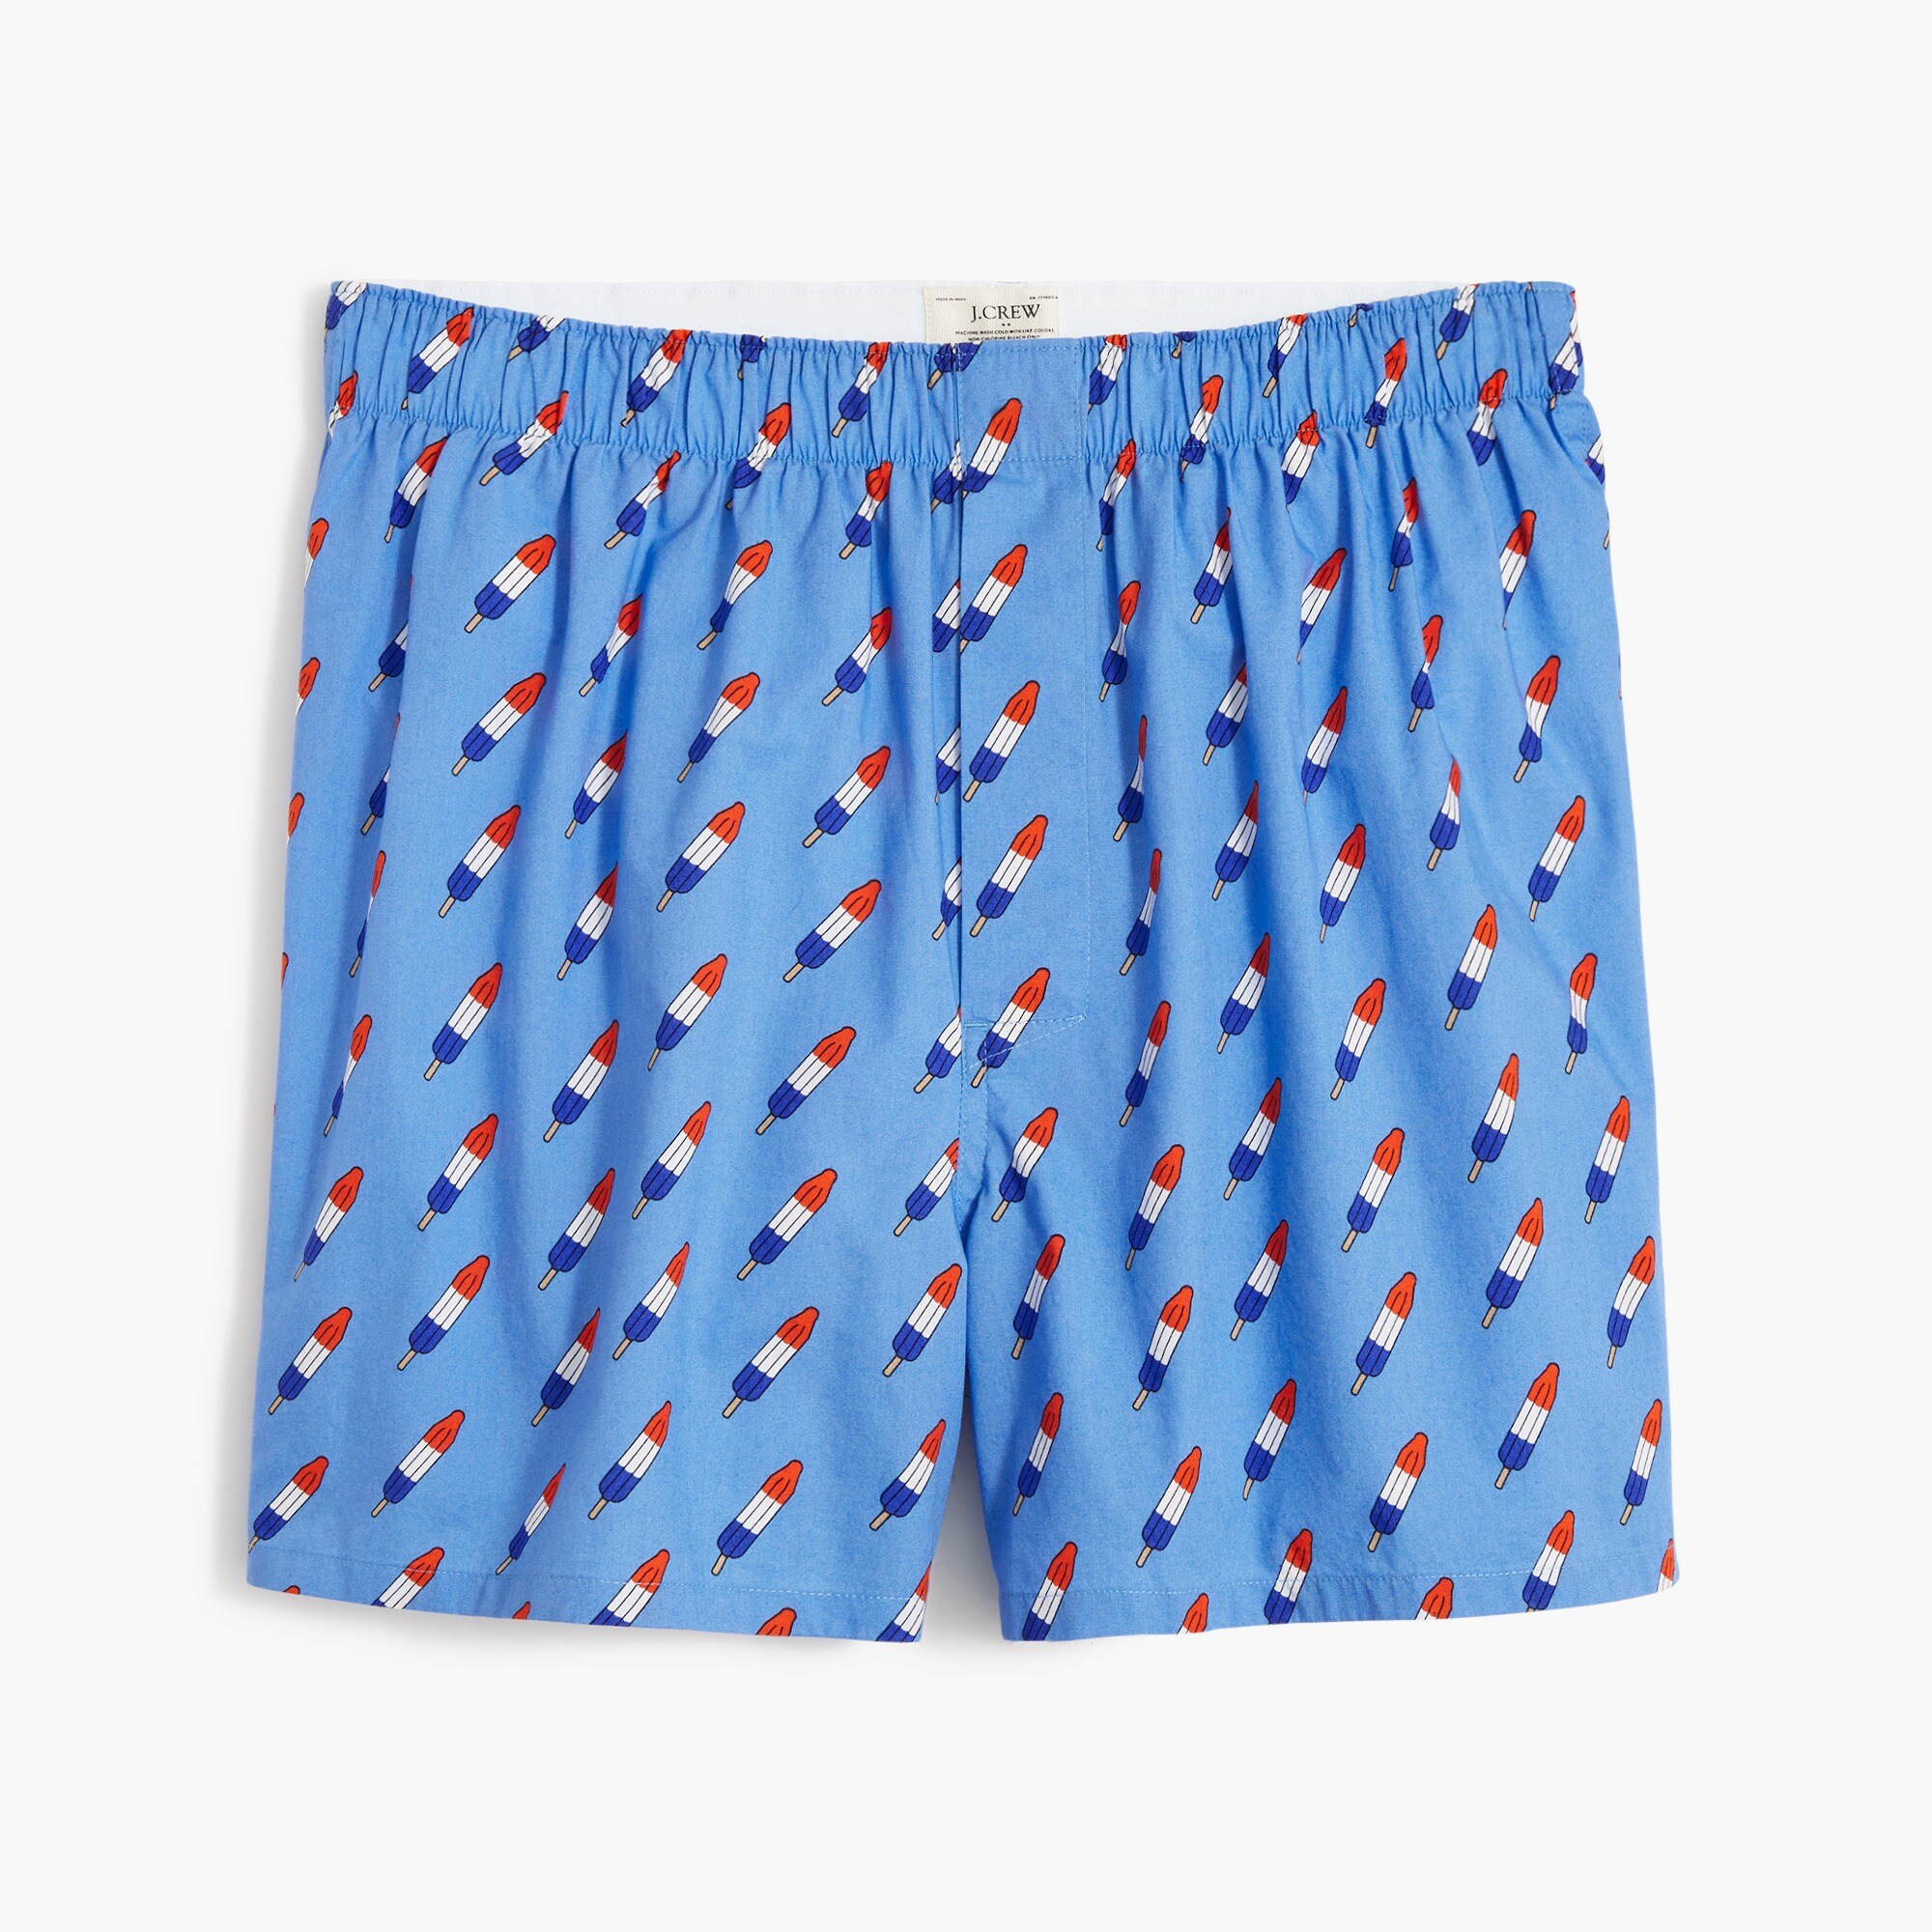 mens Woven boxers